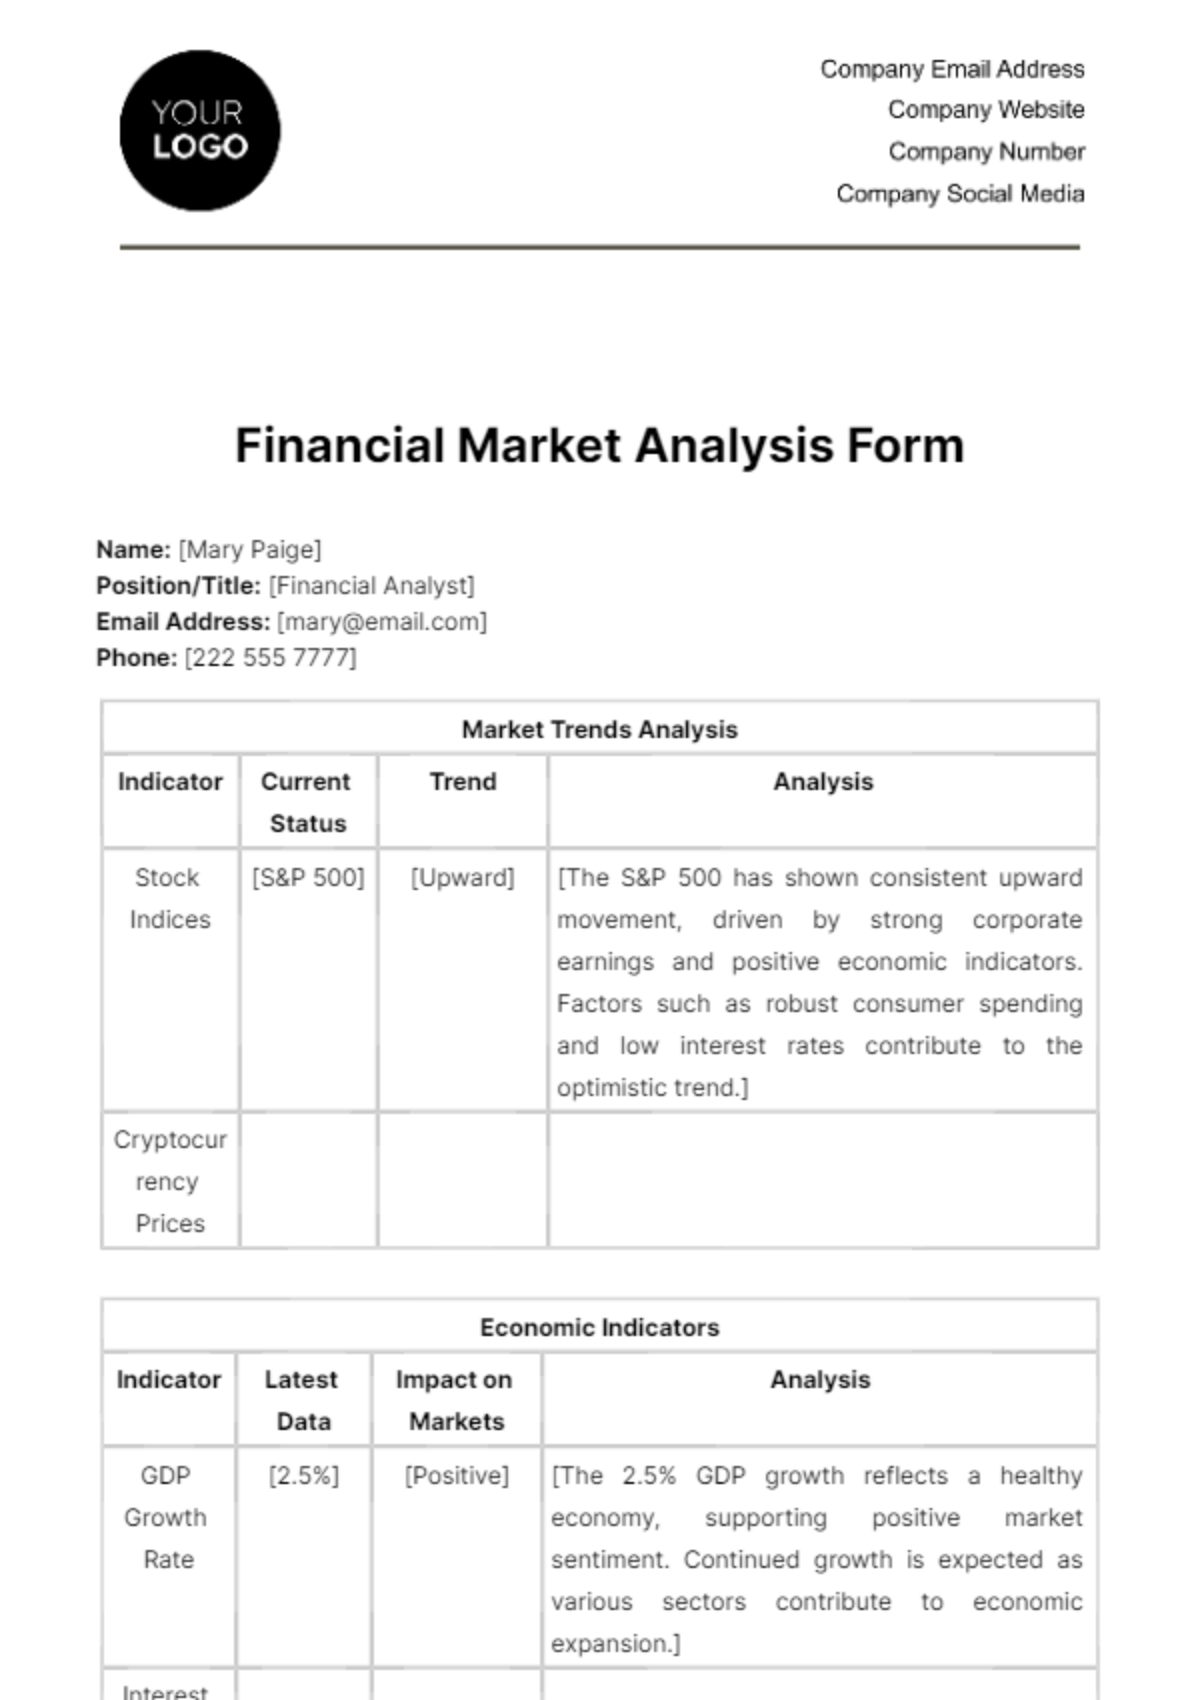 Free Financial Market Analysis Form Template